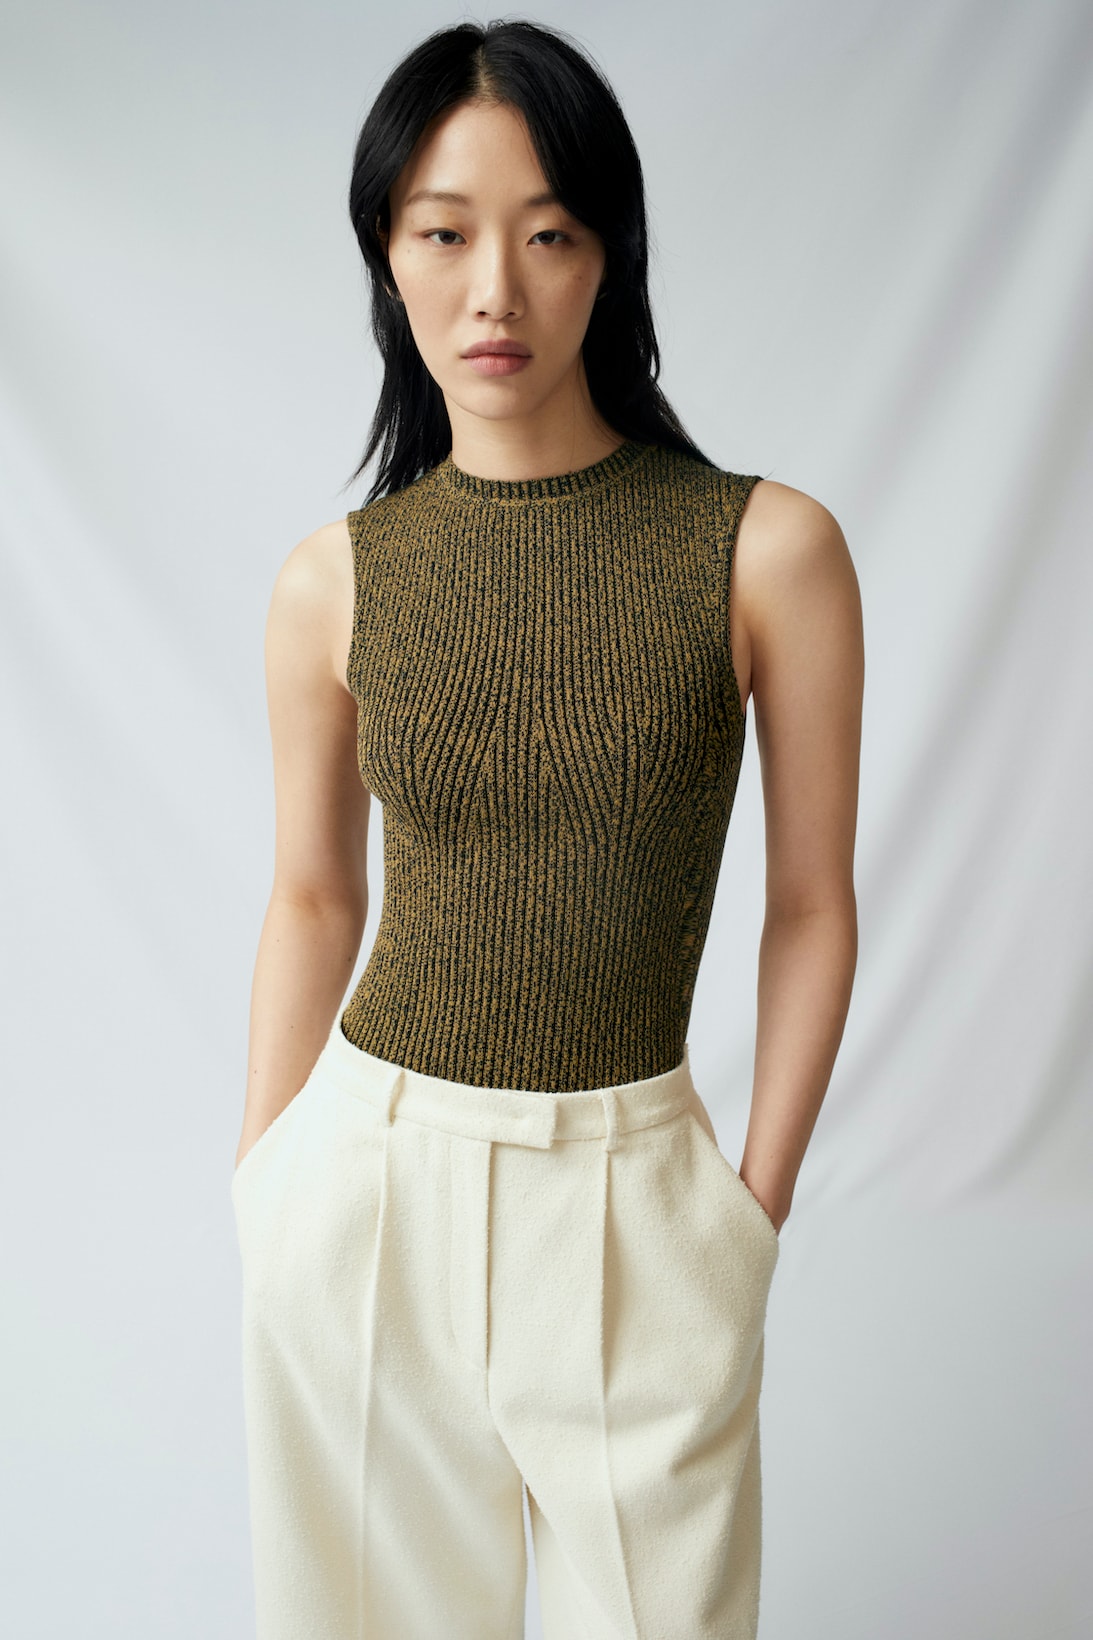 sora choi cos spring womenswear summer collection lookbook olive green tank top white pants